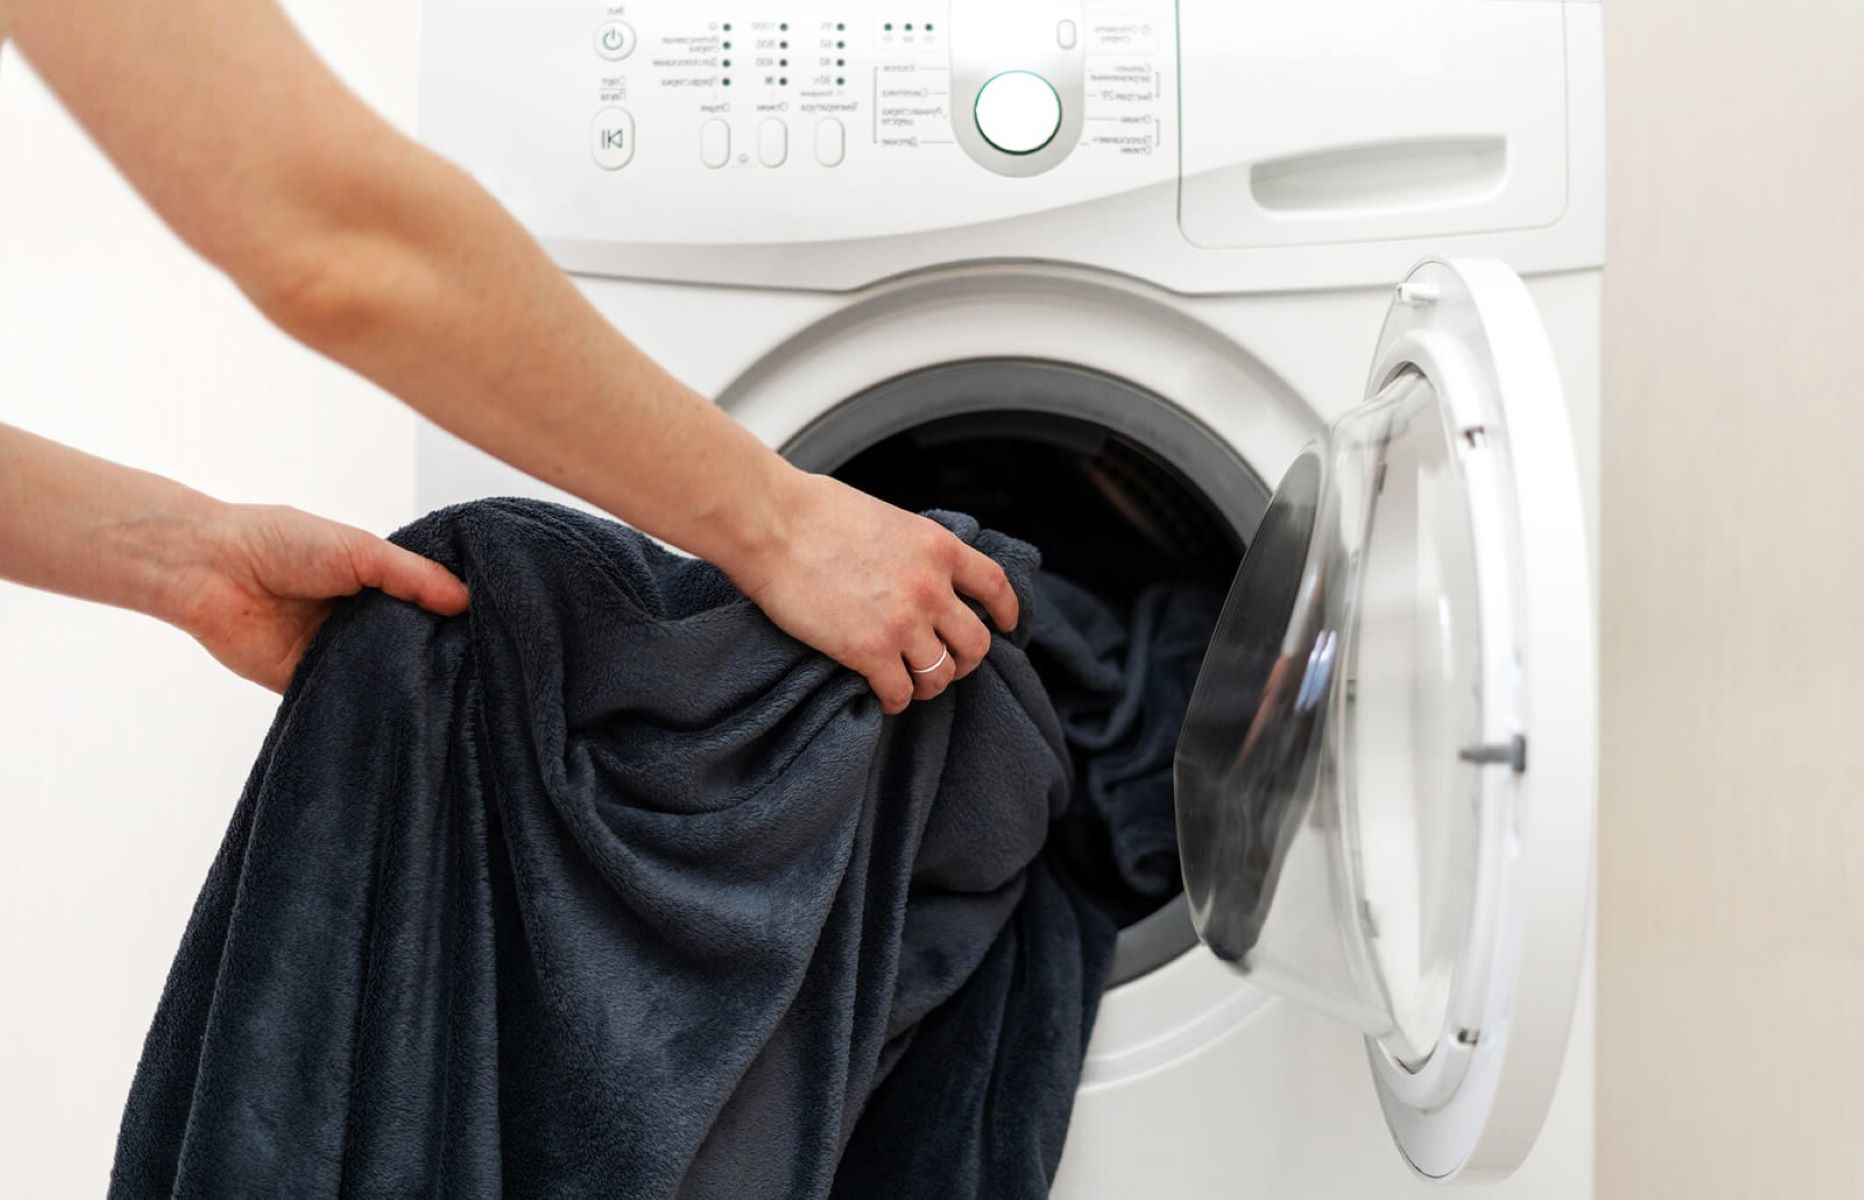 How To Wash An Electric Blanket In The Washing Machine